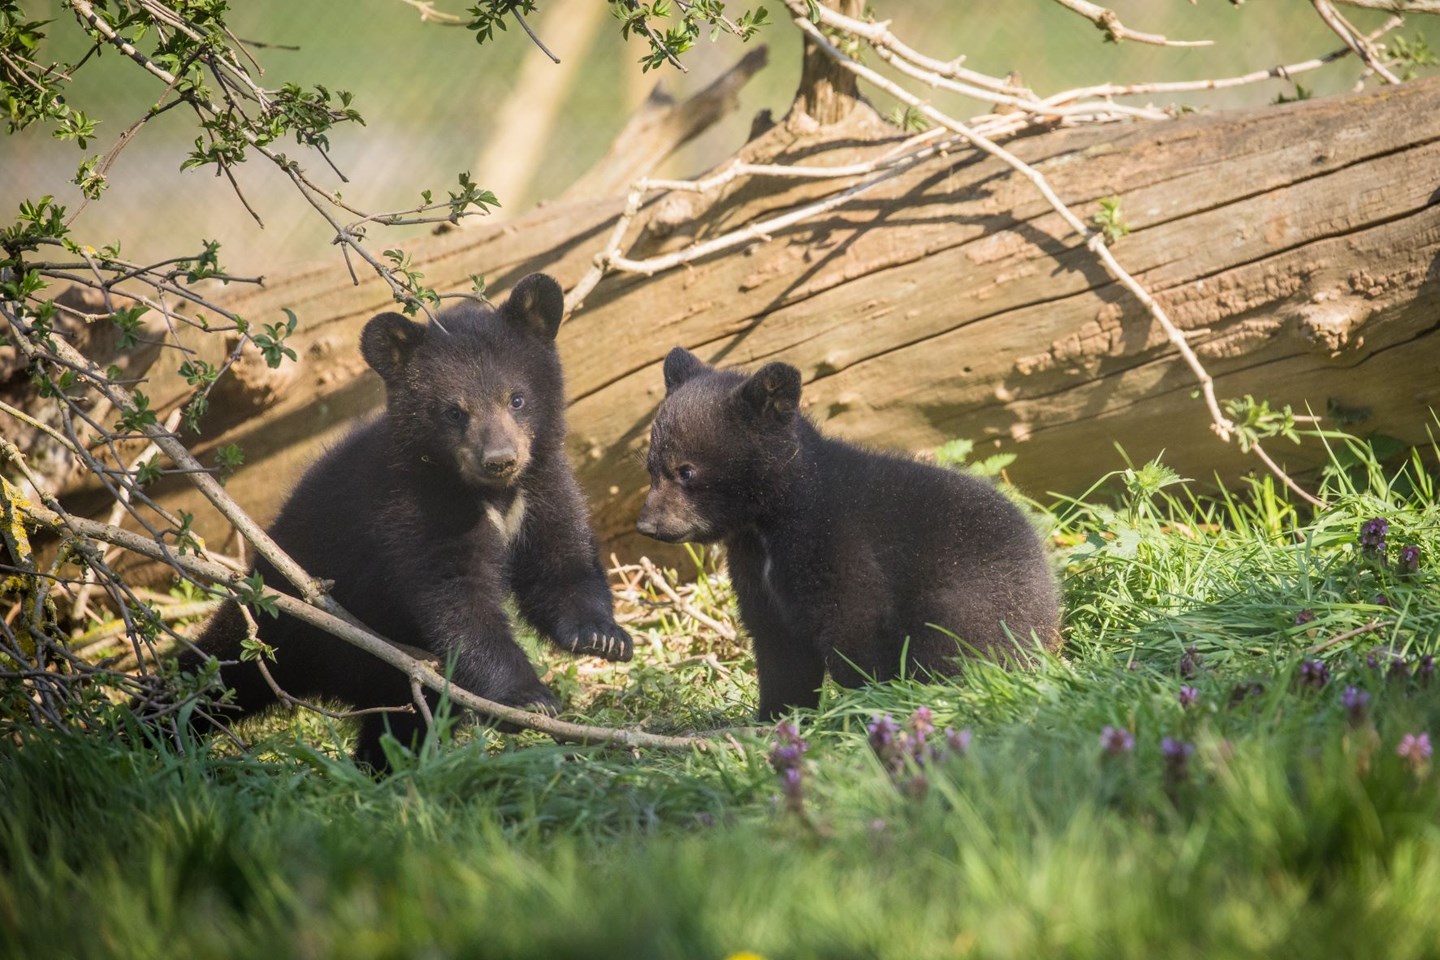 Two baby North American Black Bear cubs stand on grass by log and branches